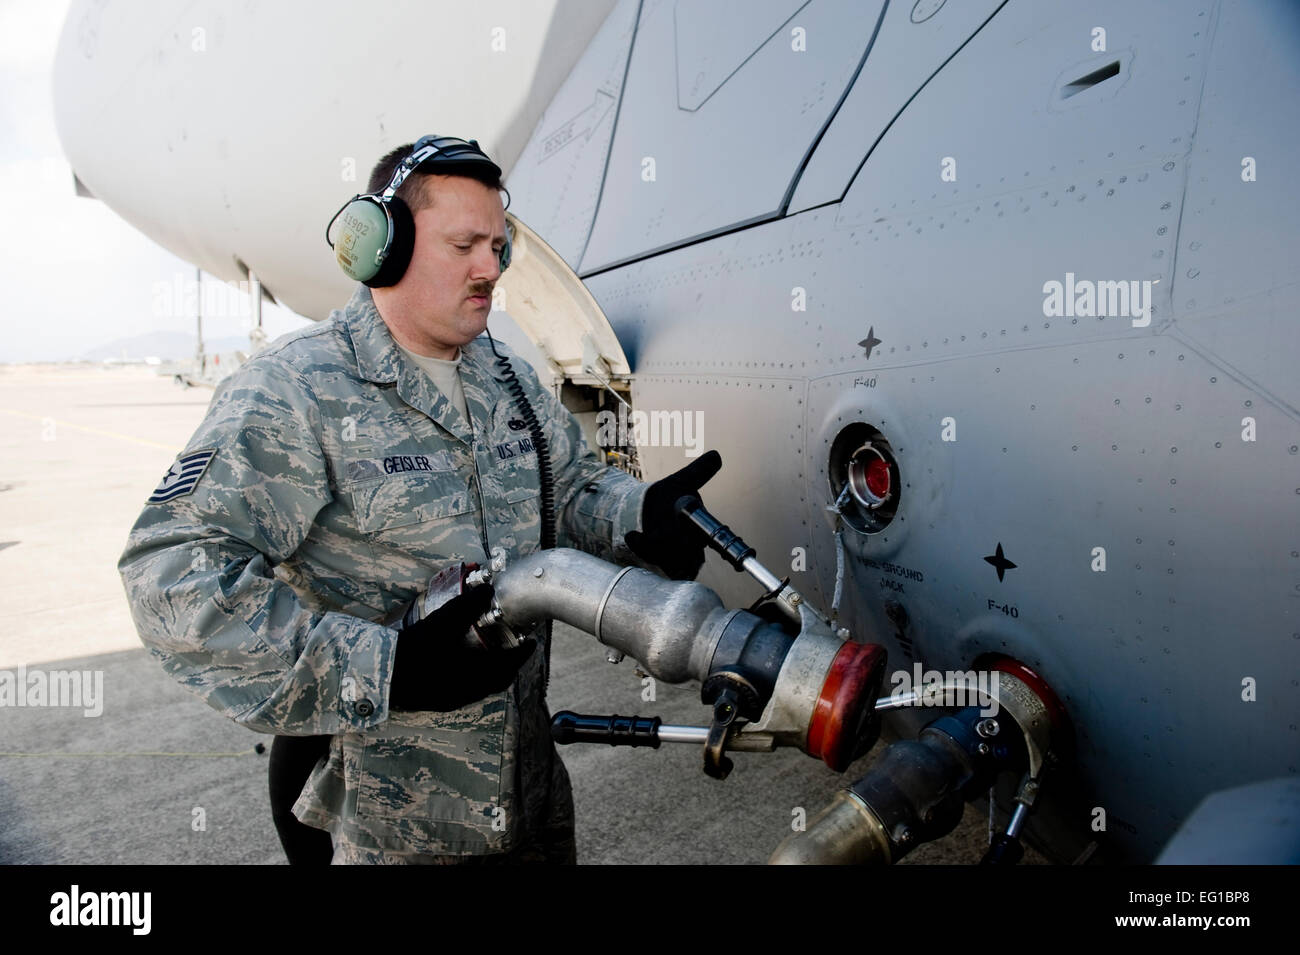 MARINES CORPS AIR STATION IWAKUNI, Japan – Tech Sgt. Chris Geisler, 176th Aircraft Maintenance Squadron, removes a fuel nozzle from C-17 Globemaster III here March 25. The C-17 flew from Yokota Air Base into Marines Corps Air Station Iwakuni to pick up marines from Marine Wing Support Squadron MWSS 171 to drop off them at Sendai Airport. MWSS-171 where heading to Sendai Airport to setup portable showers to bring humanitarian assistance to Japan in part of Operation Tomodachi. Staff Sgt. Jonathan Steffen Stock Photo